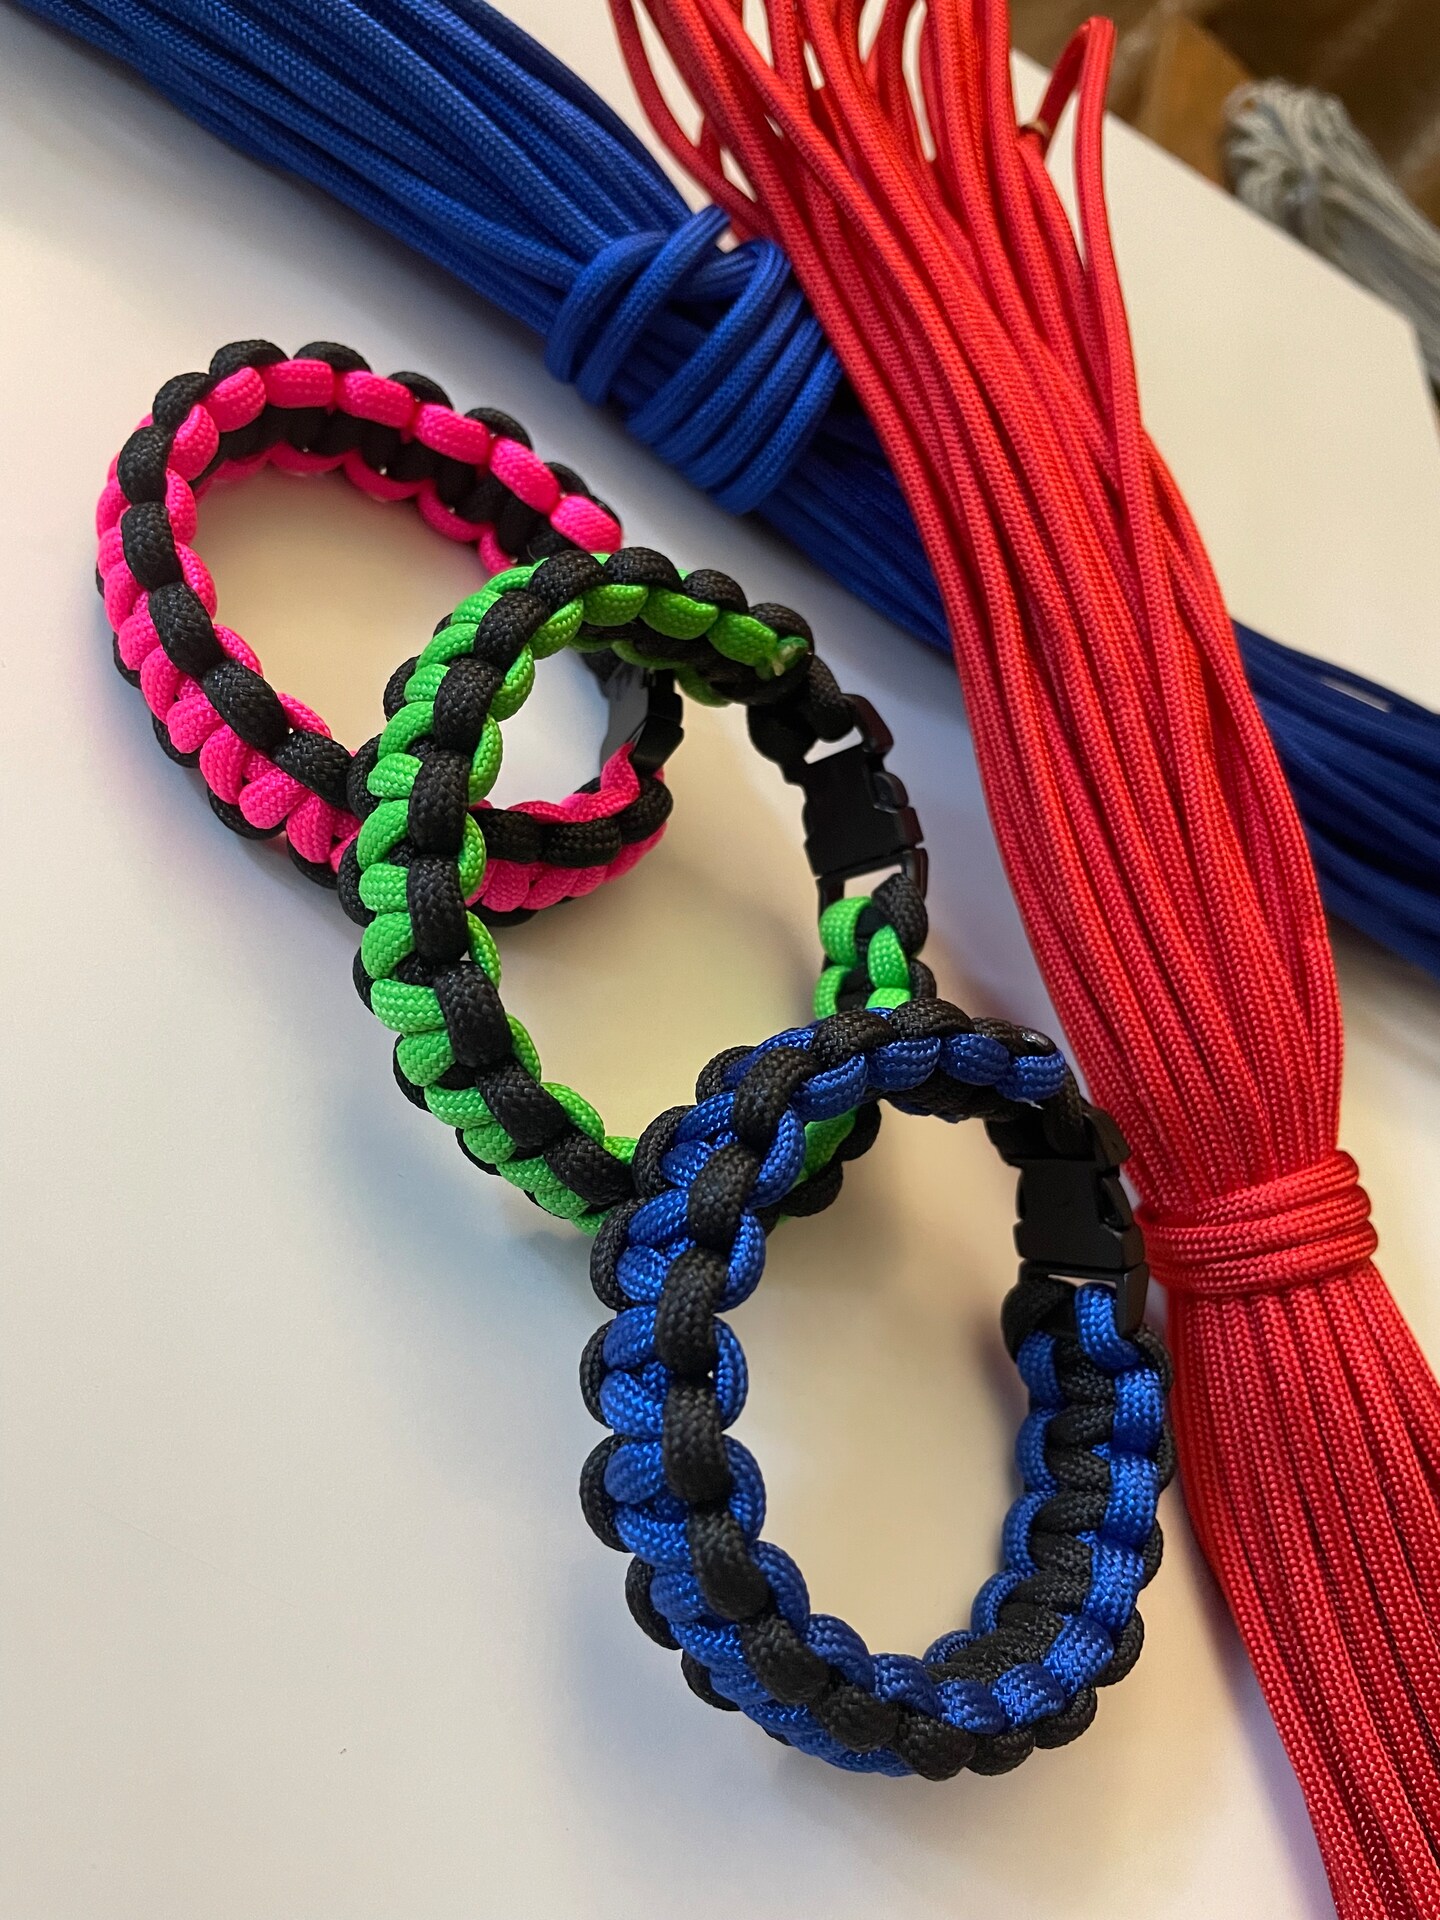 5 Easy Variations on the Cobra Weave - Paracord Planet